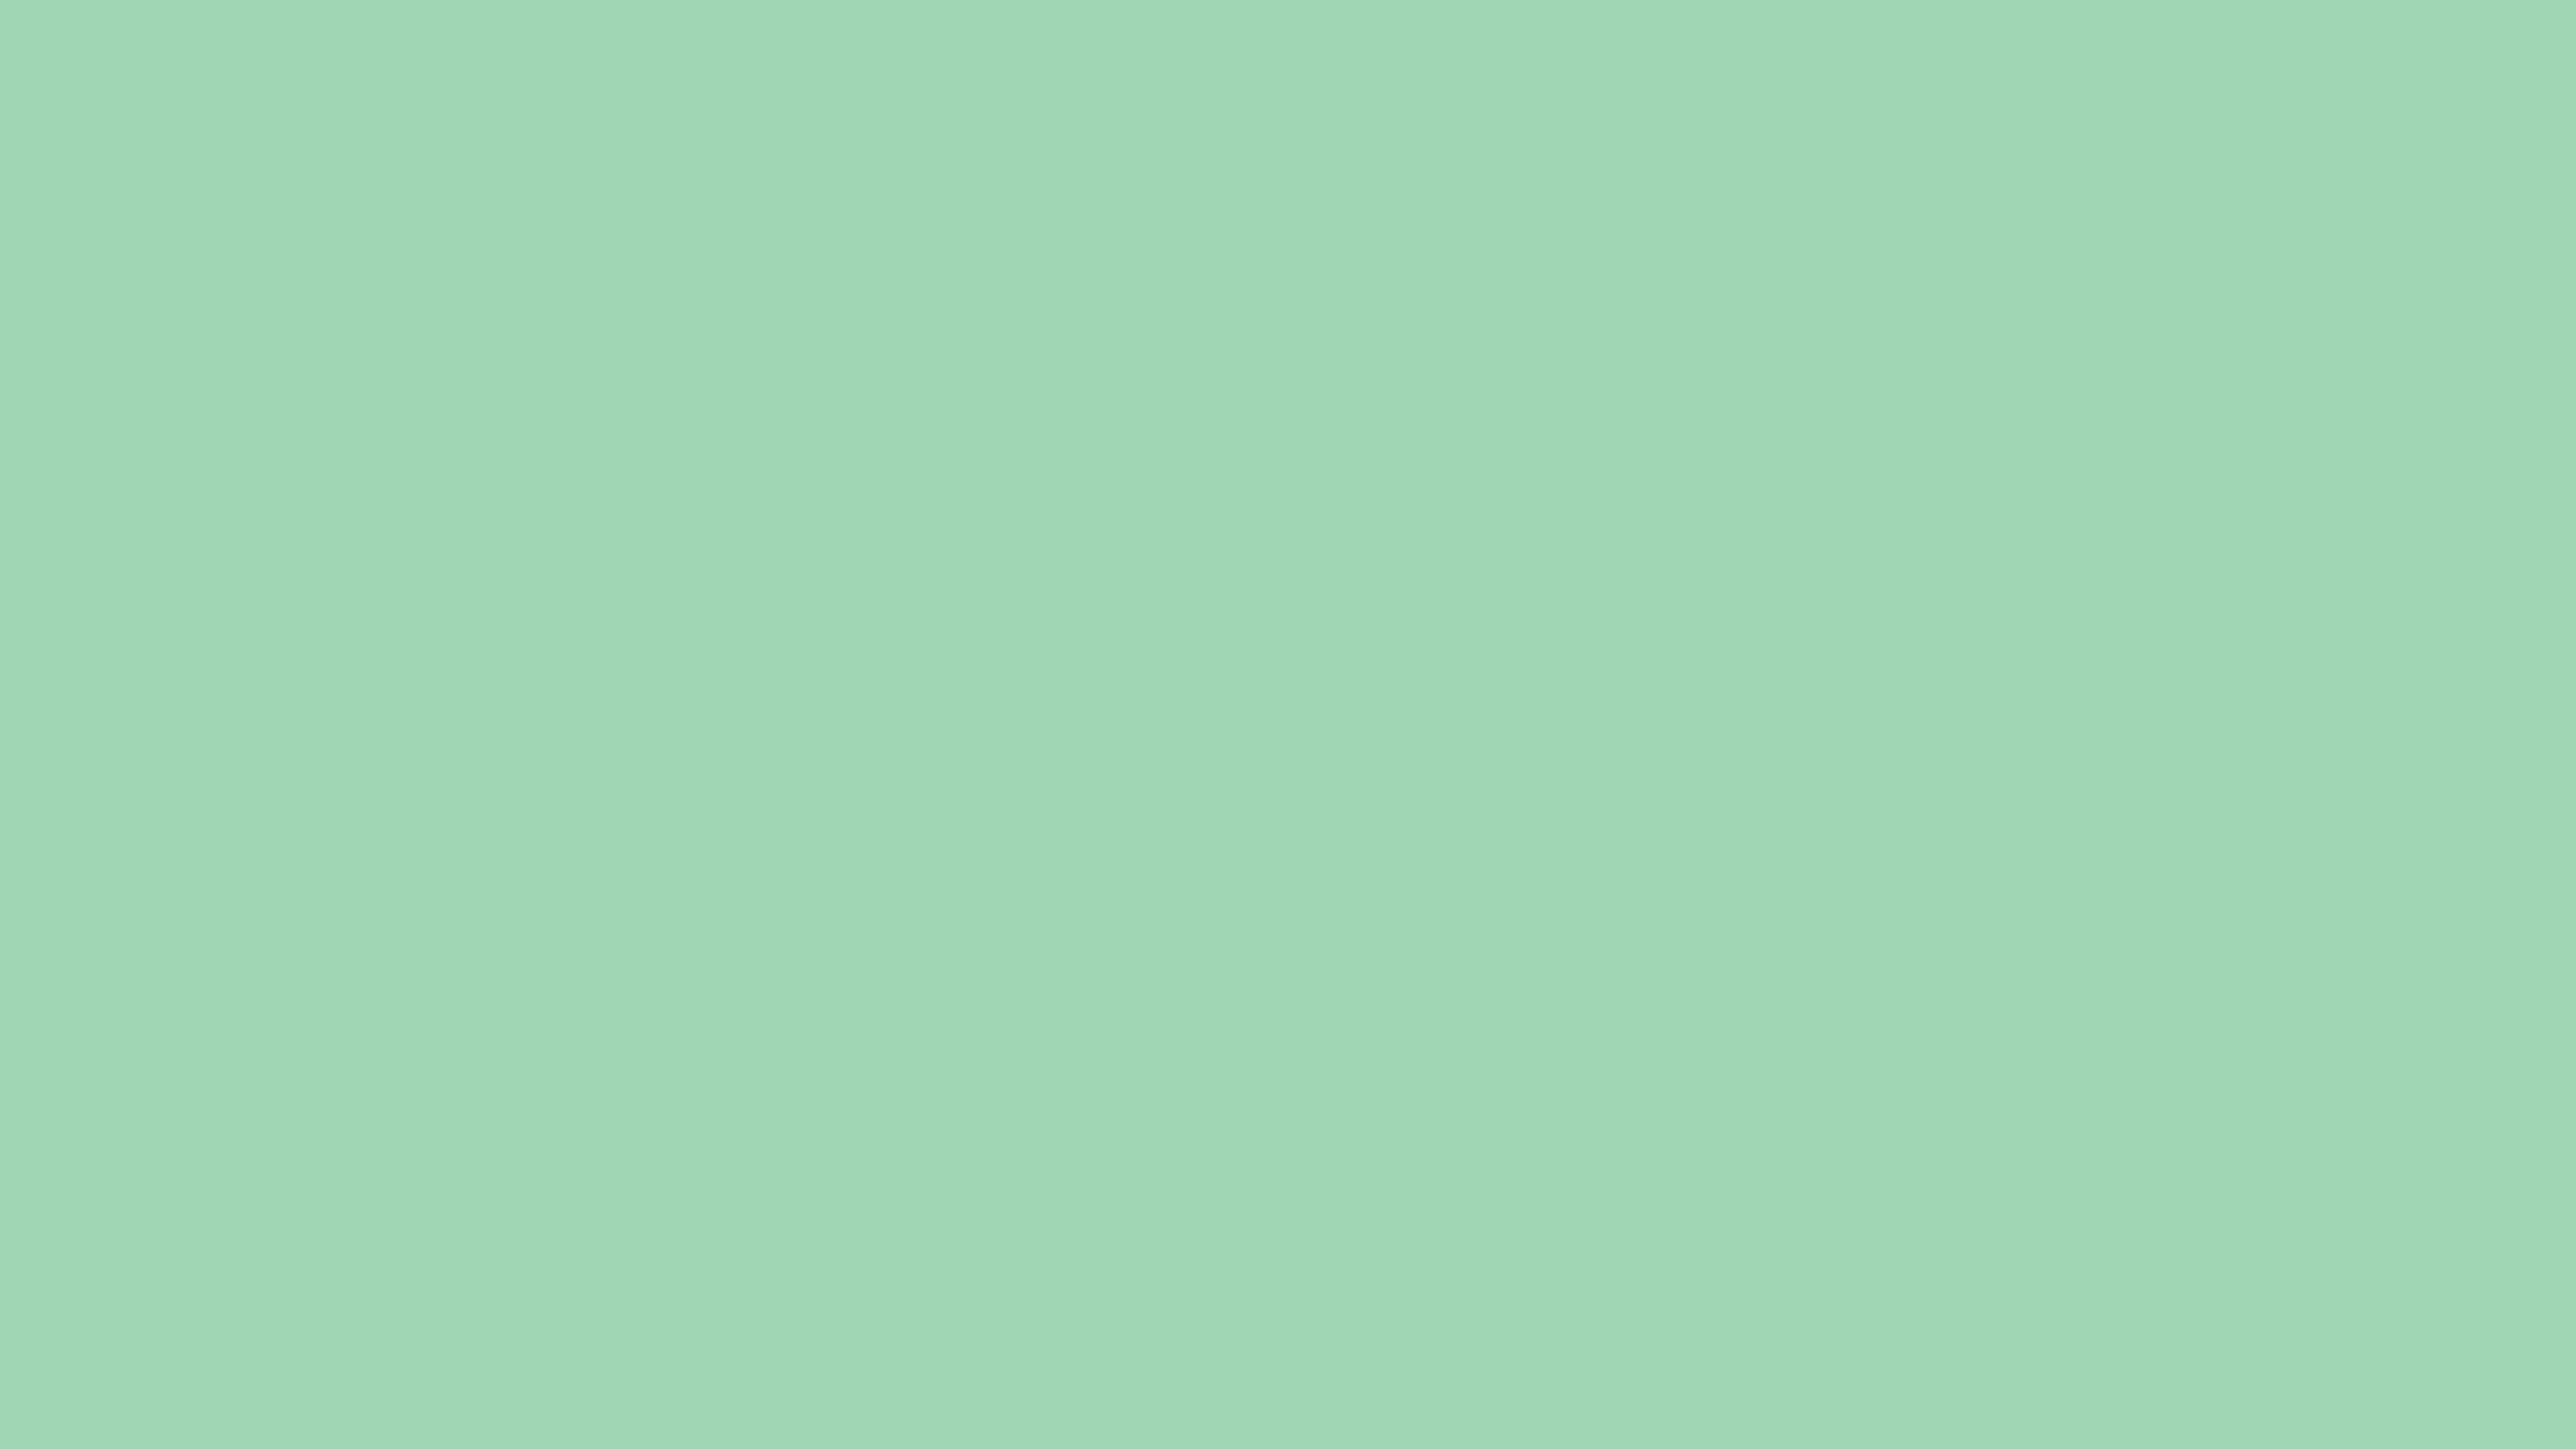 5120x2880 Turquoise Green Solid Color Background